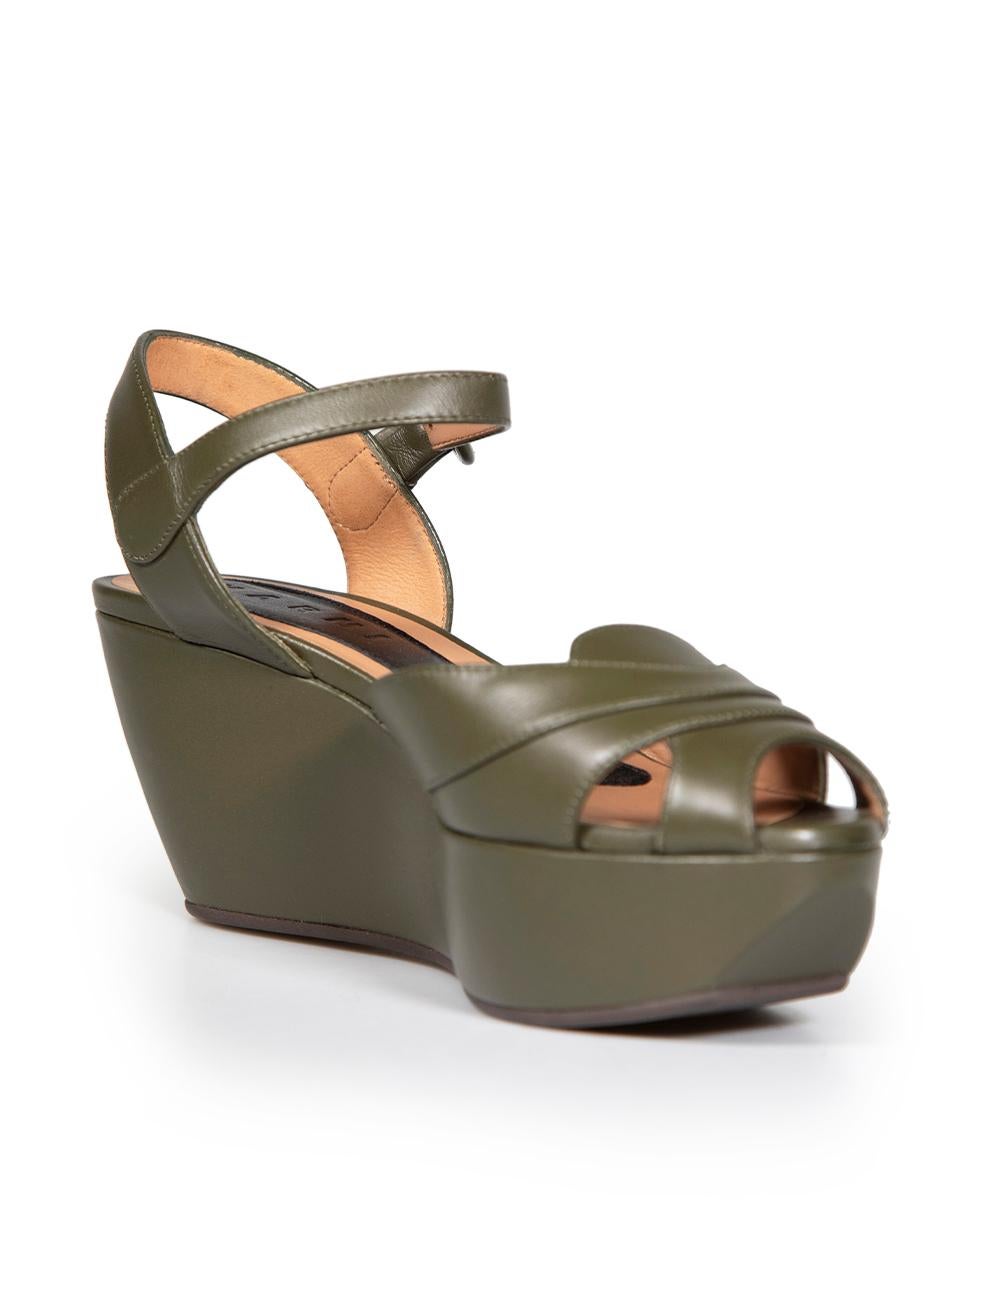 CONDITION is Very good. Minimal wear to sandals is evident. Some very light scratches to the peep toe leather and the leather buckle on this used Marni designer resale item. These shoes come with original dust bag.
 
 
 
 Details
 
 
 Khaki
 
